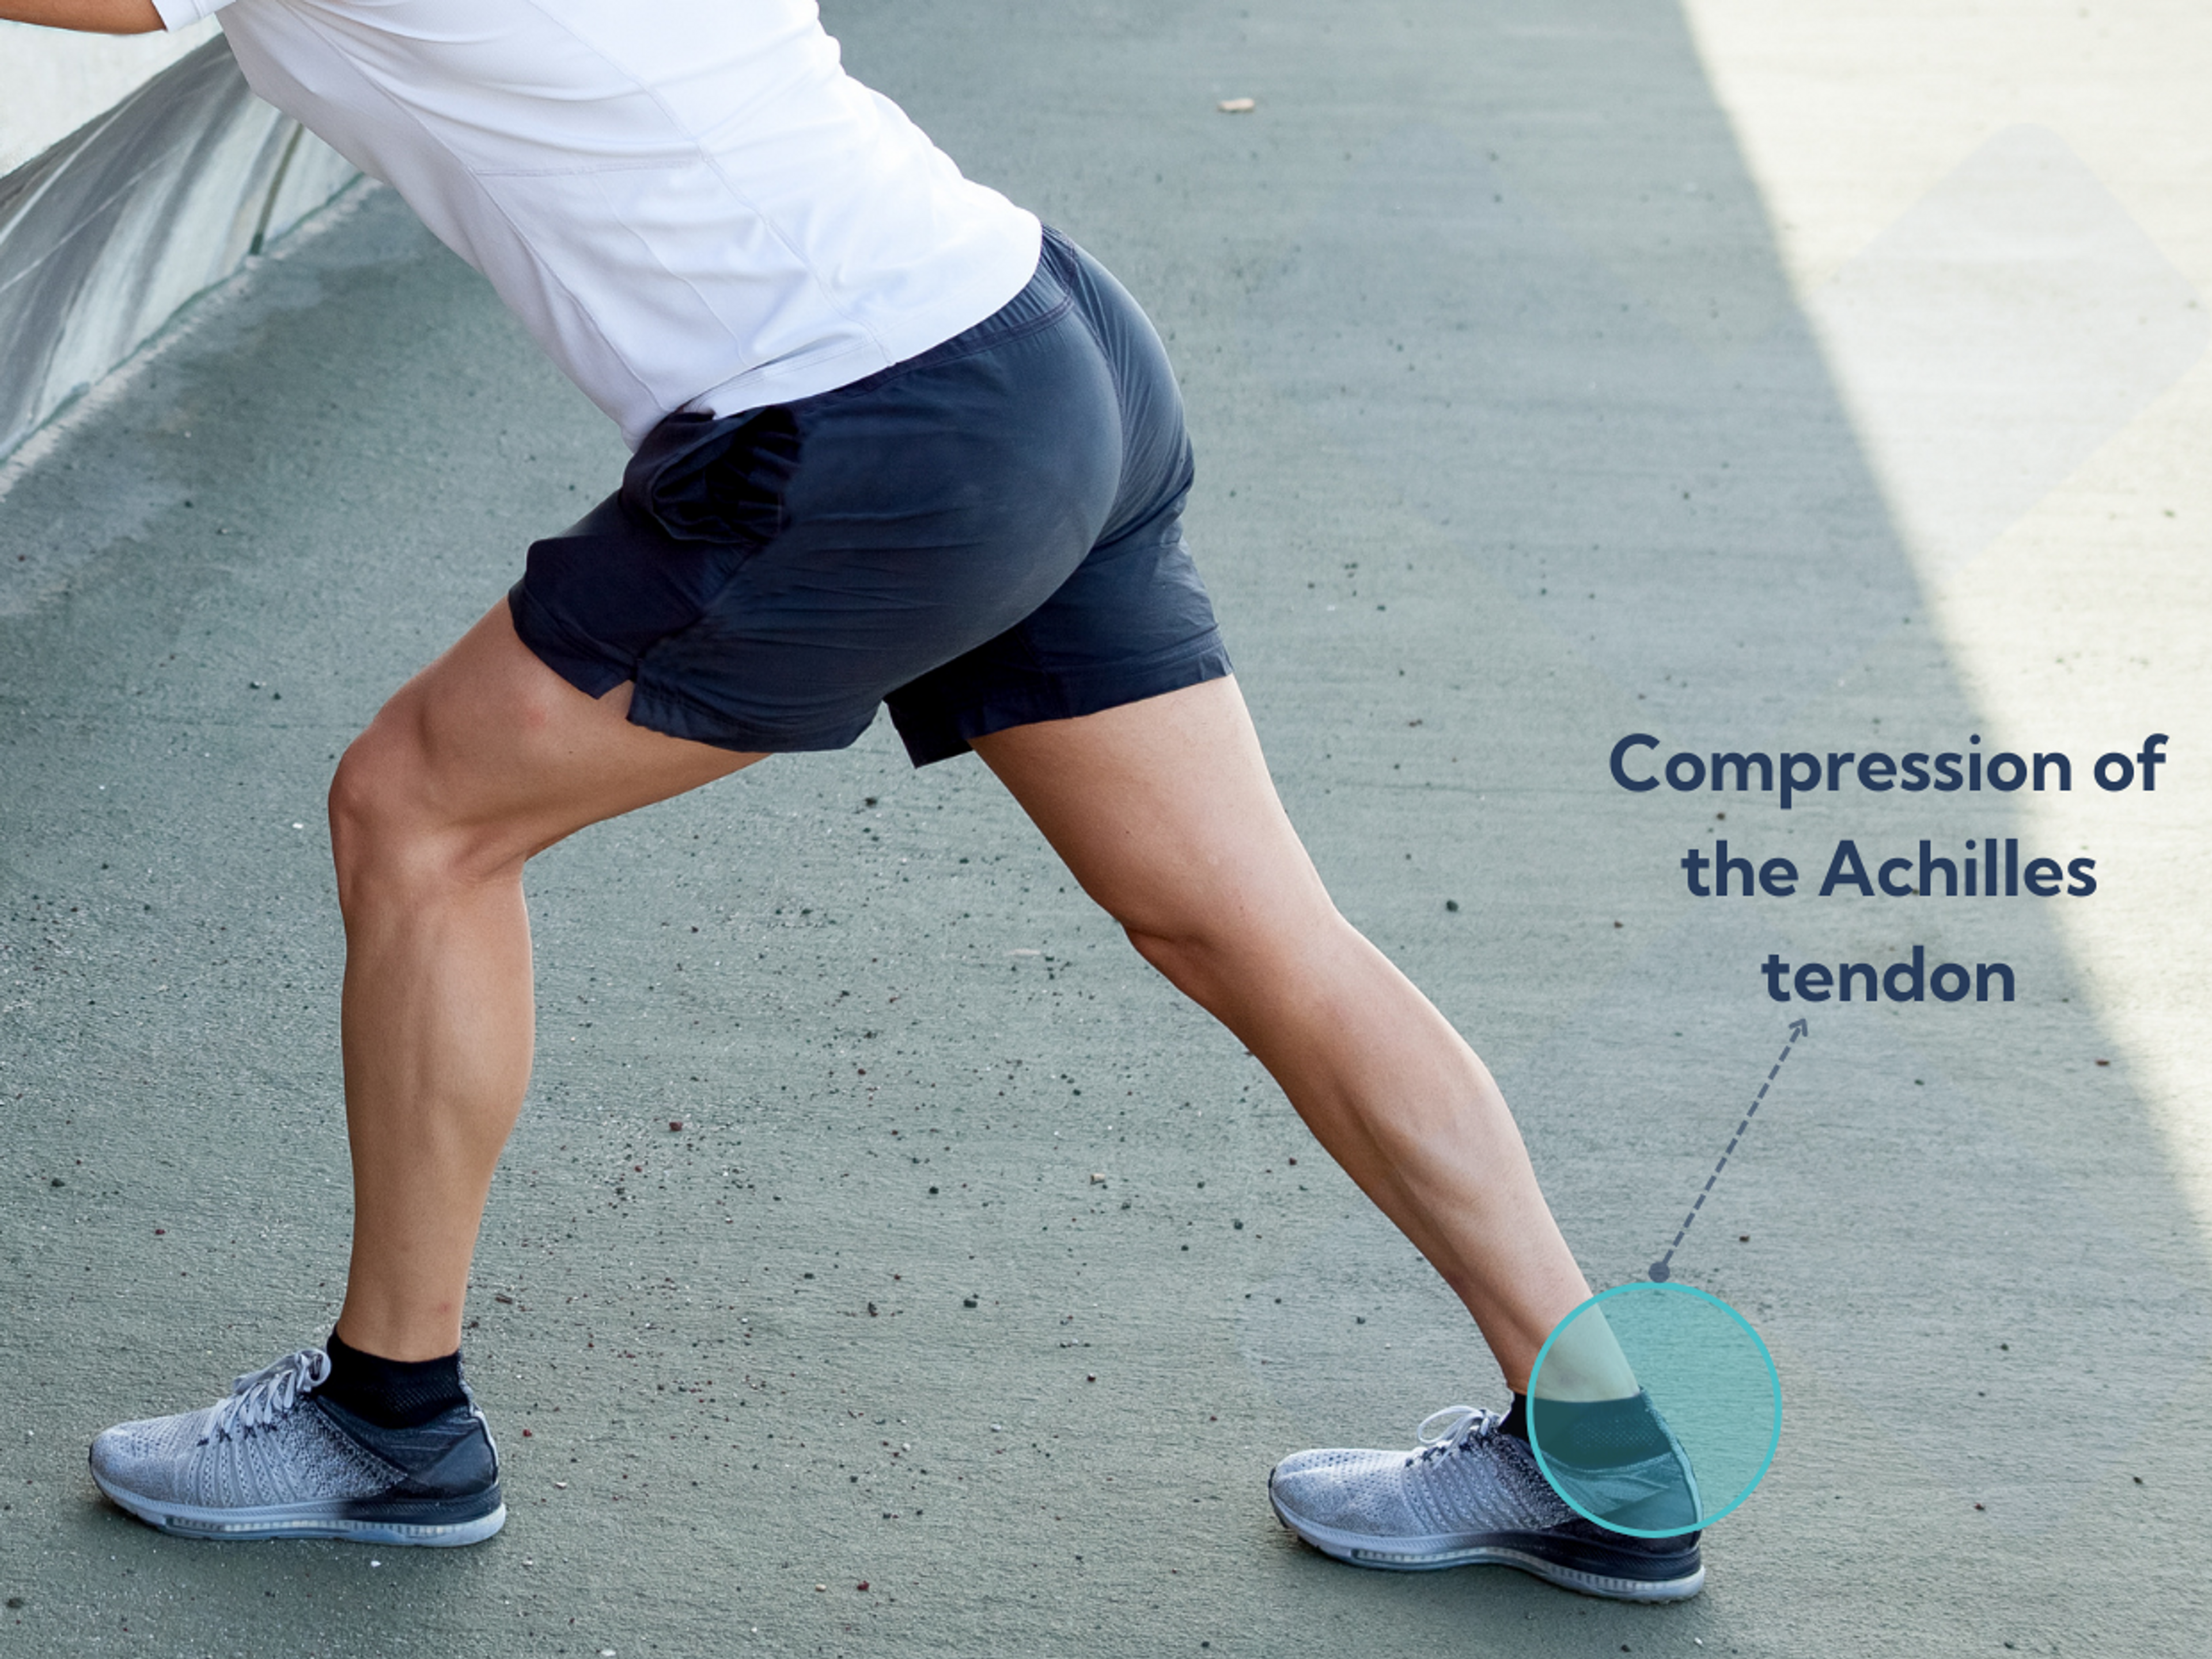 Calf stretches causes compression of the Achilles tendon on the heel bone and can make insertional Achilles tendonitis worse.